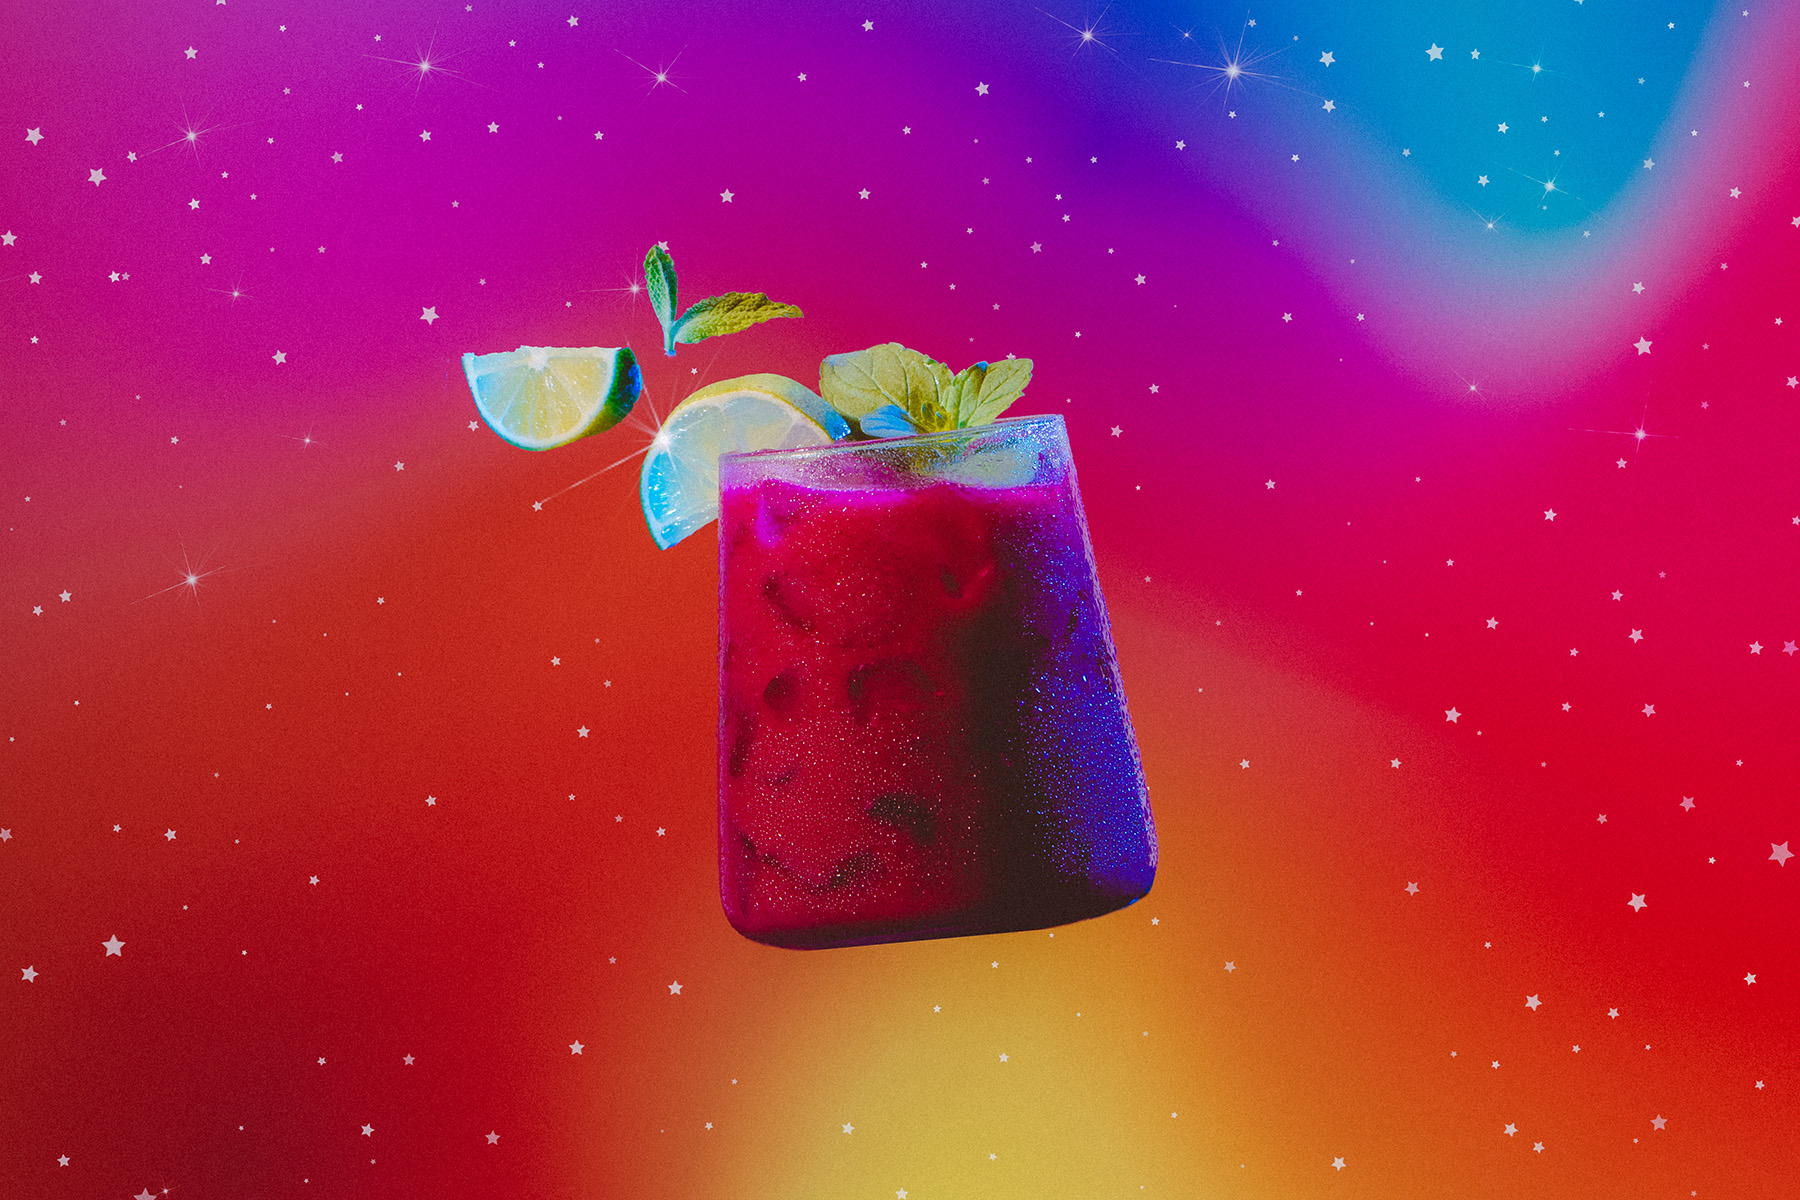 sagittarius inspired Brazilian cachaça, Filipino ube powder, tropical coconut and pineapple cocktail with floating lime and mint garnish in cosmic atmosphere